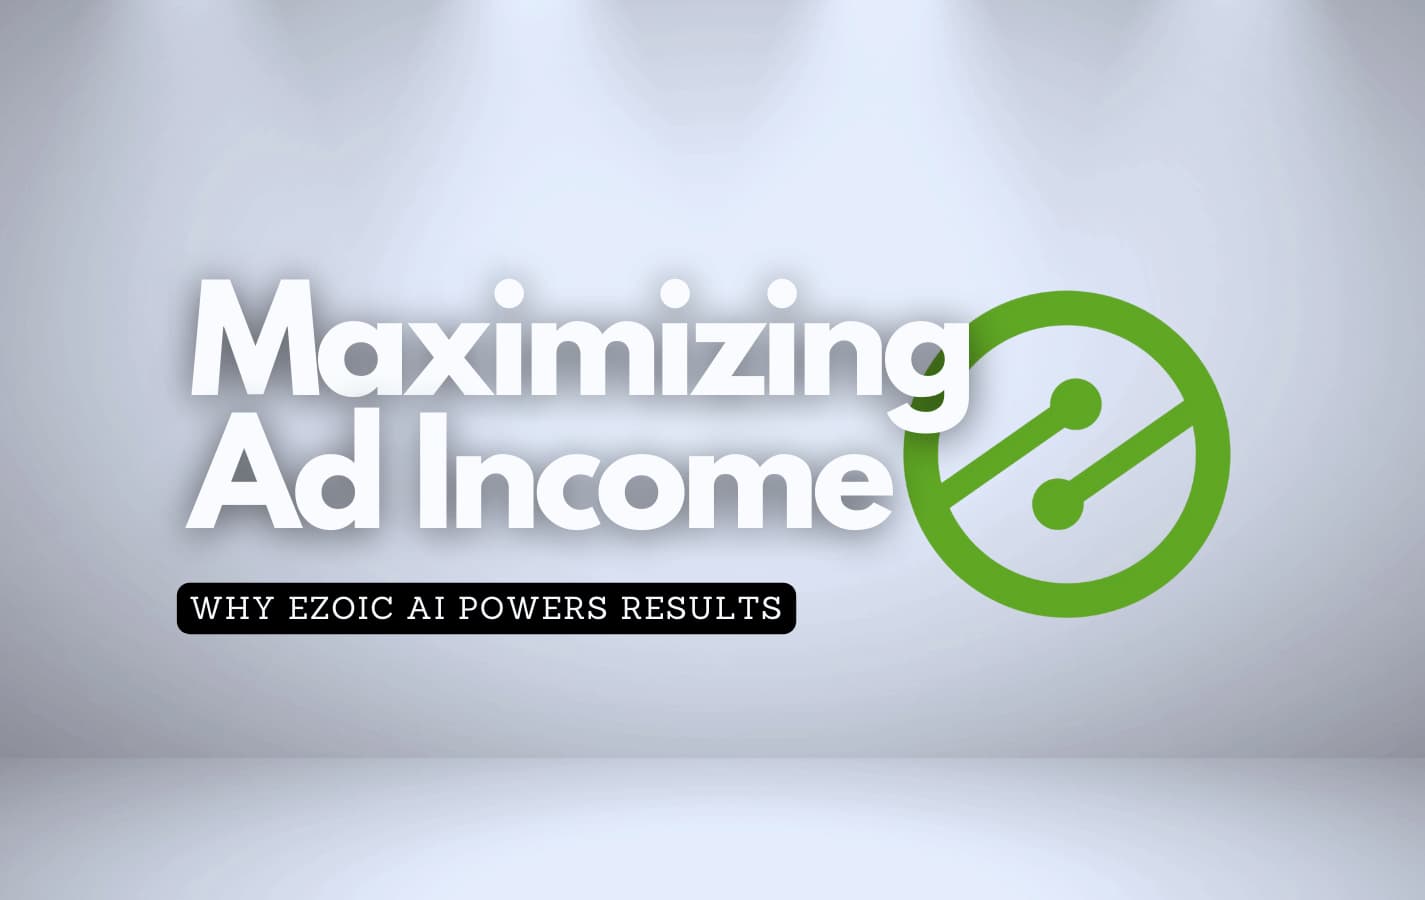 Ezoic logo against a white background with the text talking about maximizing ad income using Ezoic